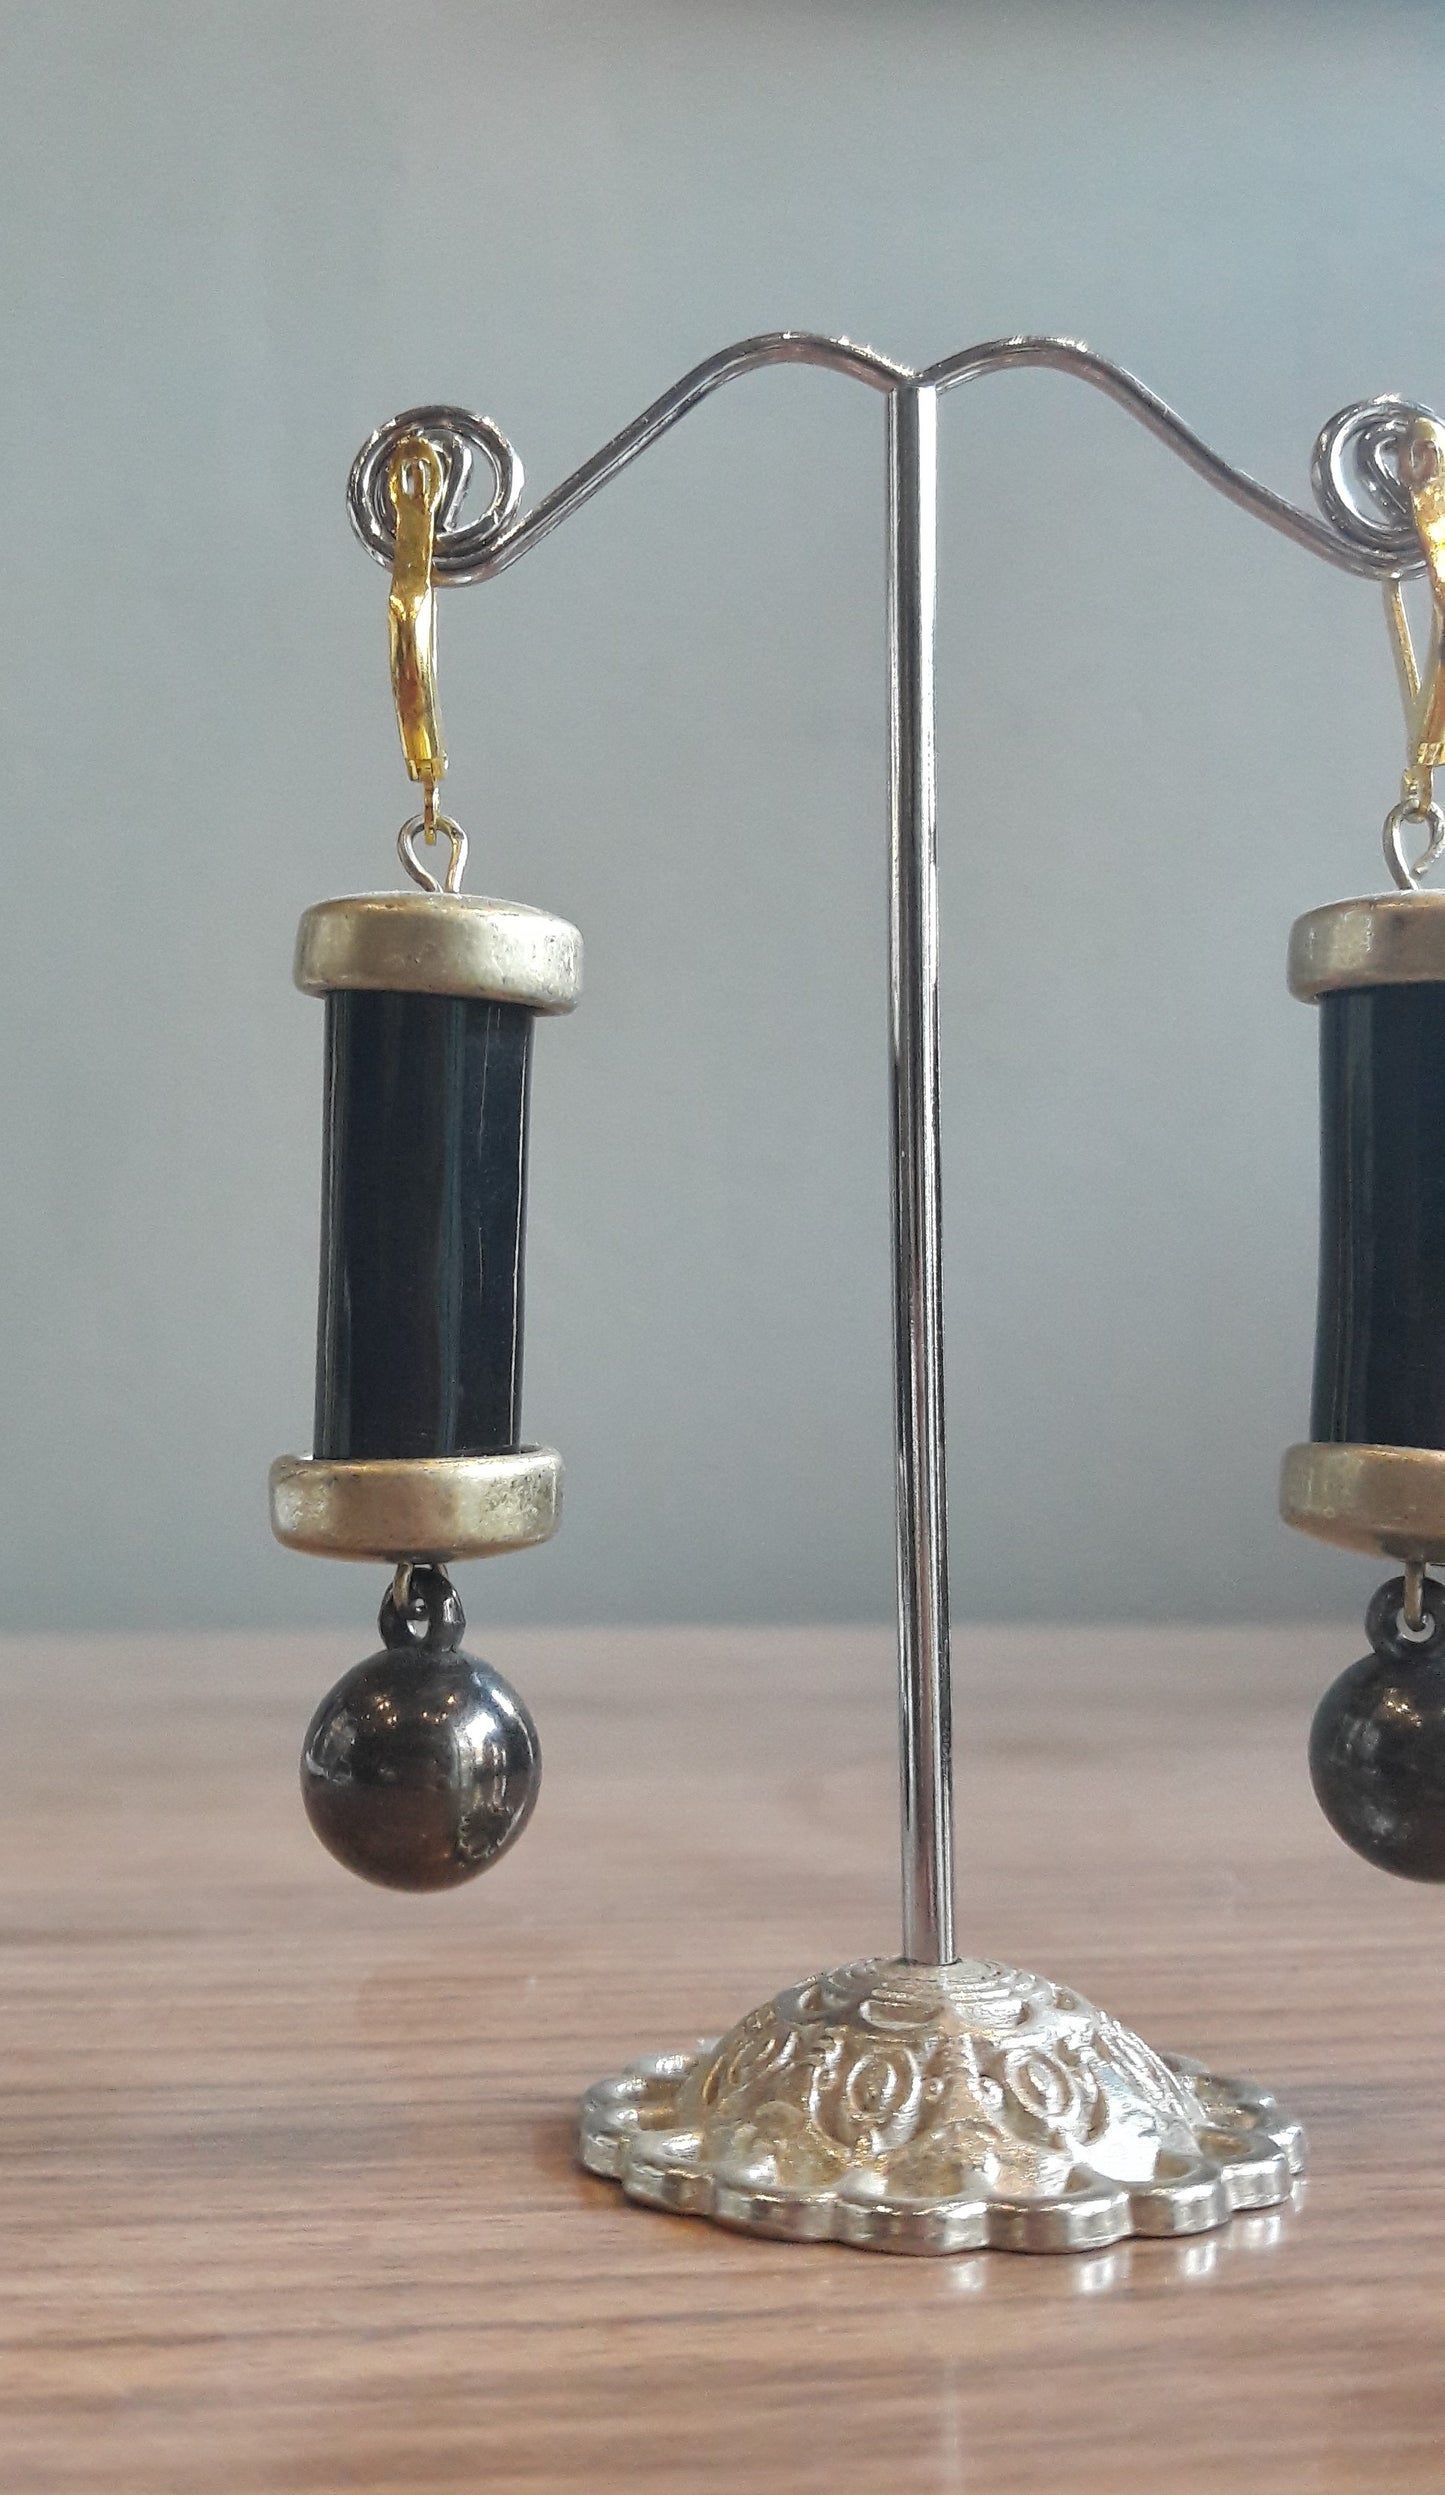 thecollective Handmade Upcycled Deco Earrings